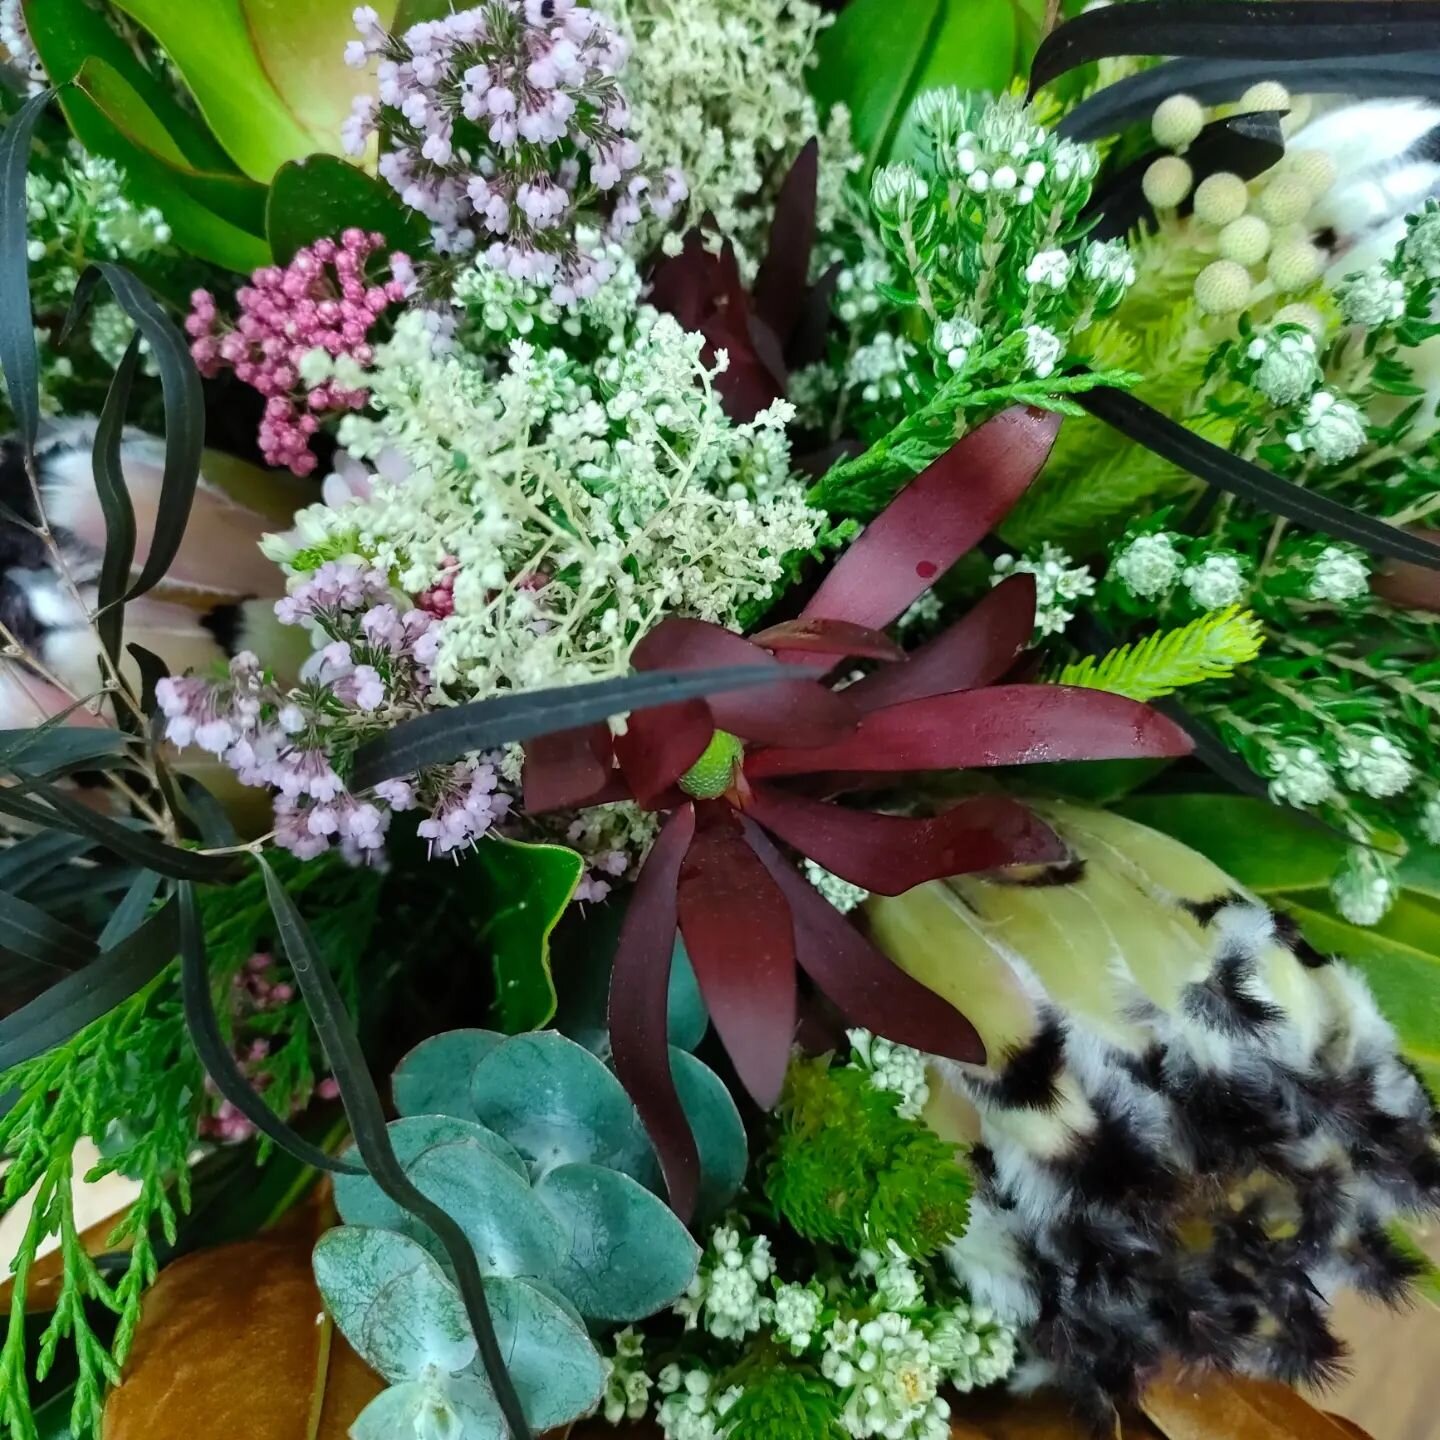 Beautiful foliage's in today!
Have you ordered your Mother's Day flowers yet?
#thevillageflorist #napierflorist 
#freshseasonalblooms #dailydelivery